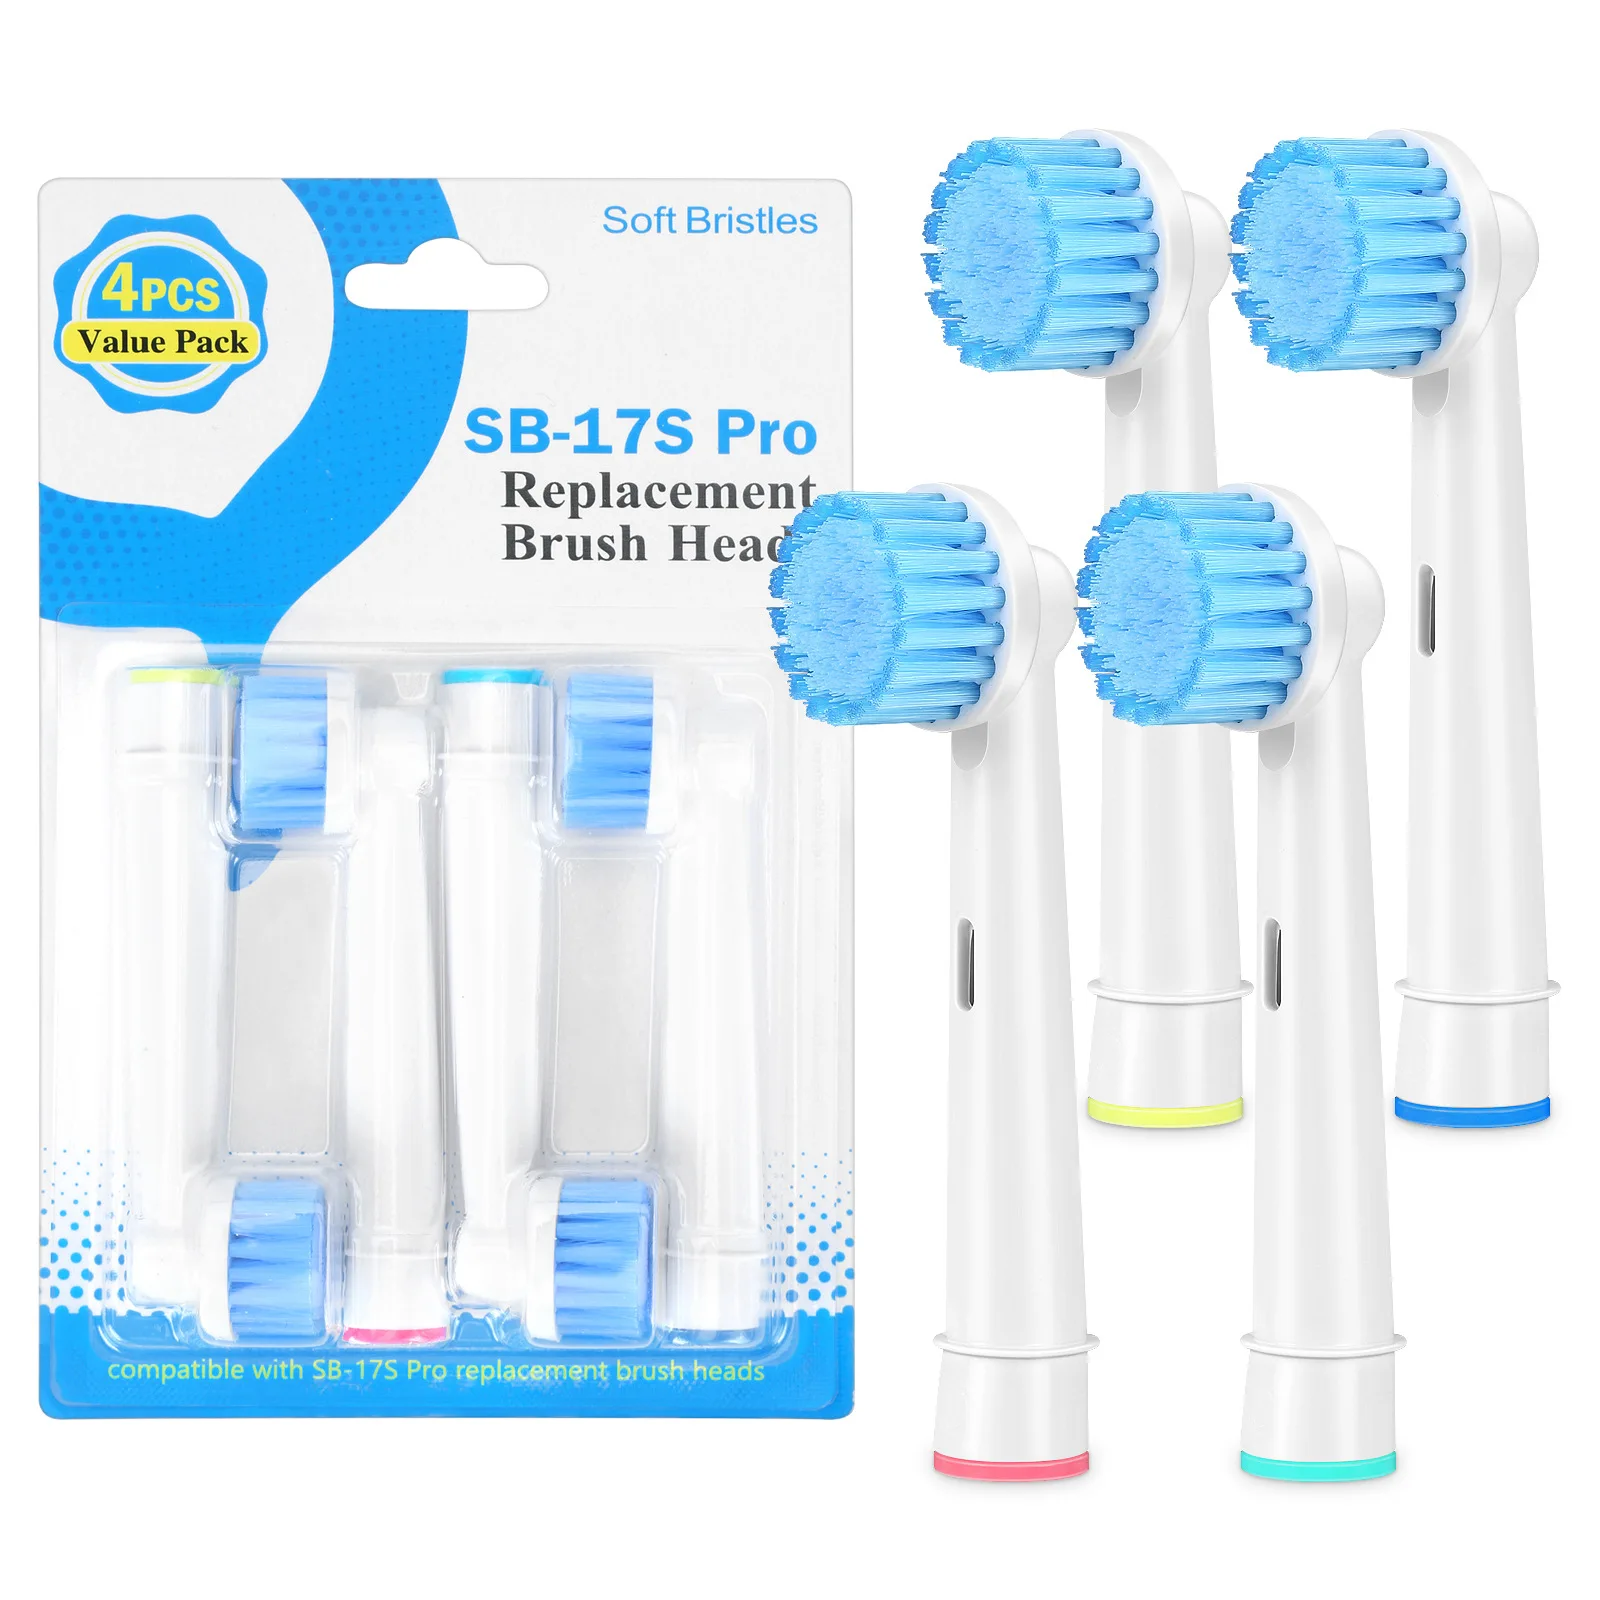 4 Pcs/Pack Replacement Brush Heads For Oral B Electric Toothbrush Head Soft Dupont Bristle Teeth Cleaning & Whitening Brush Head